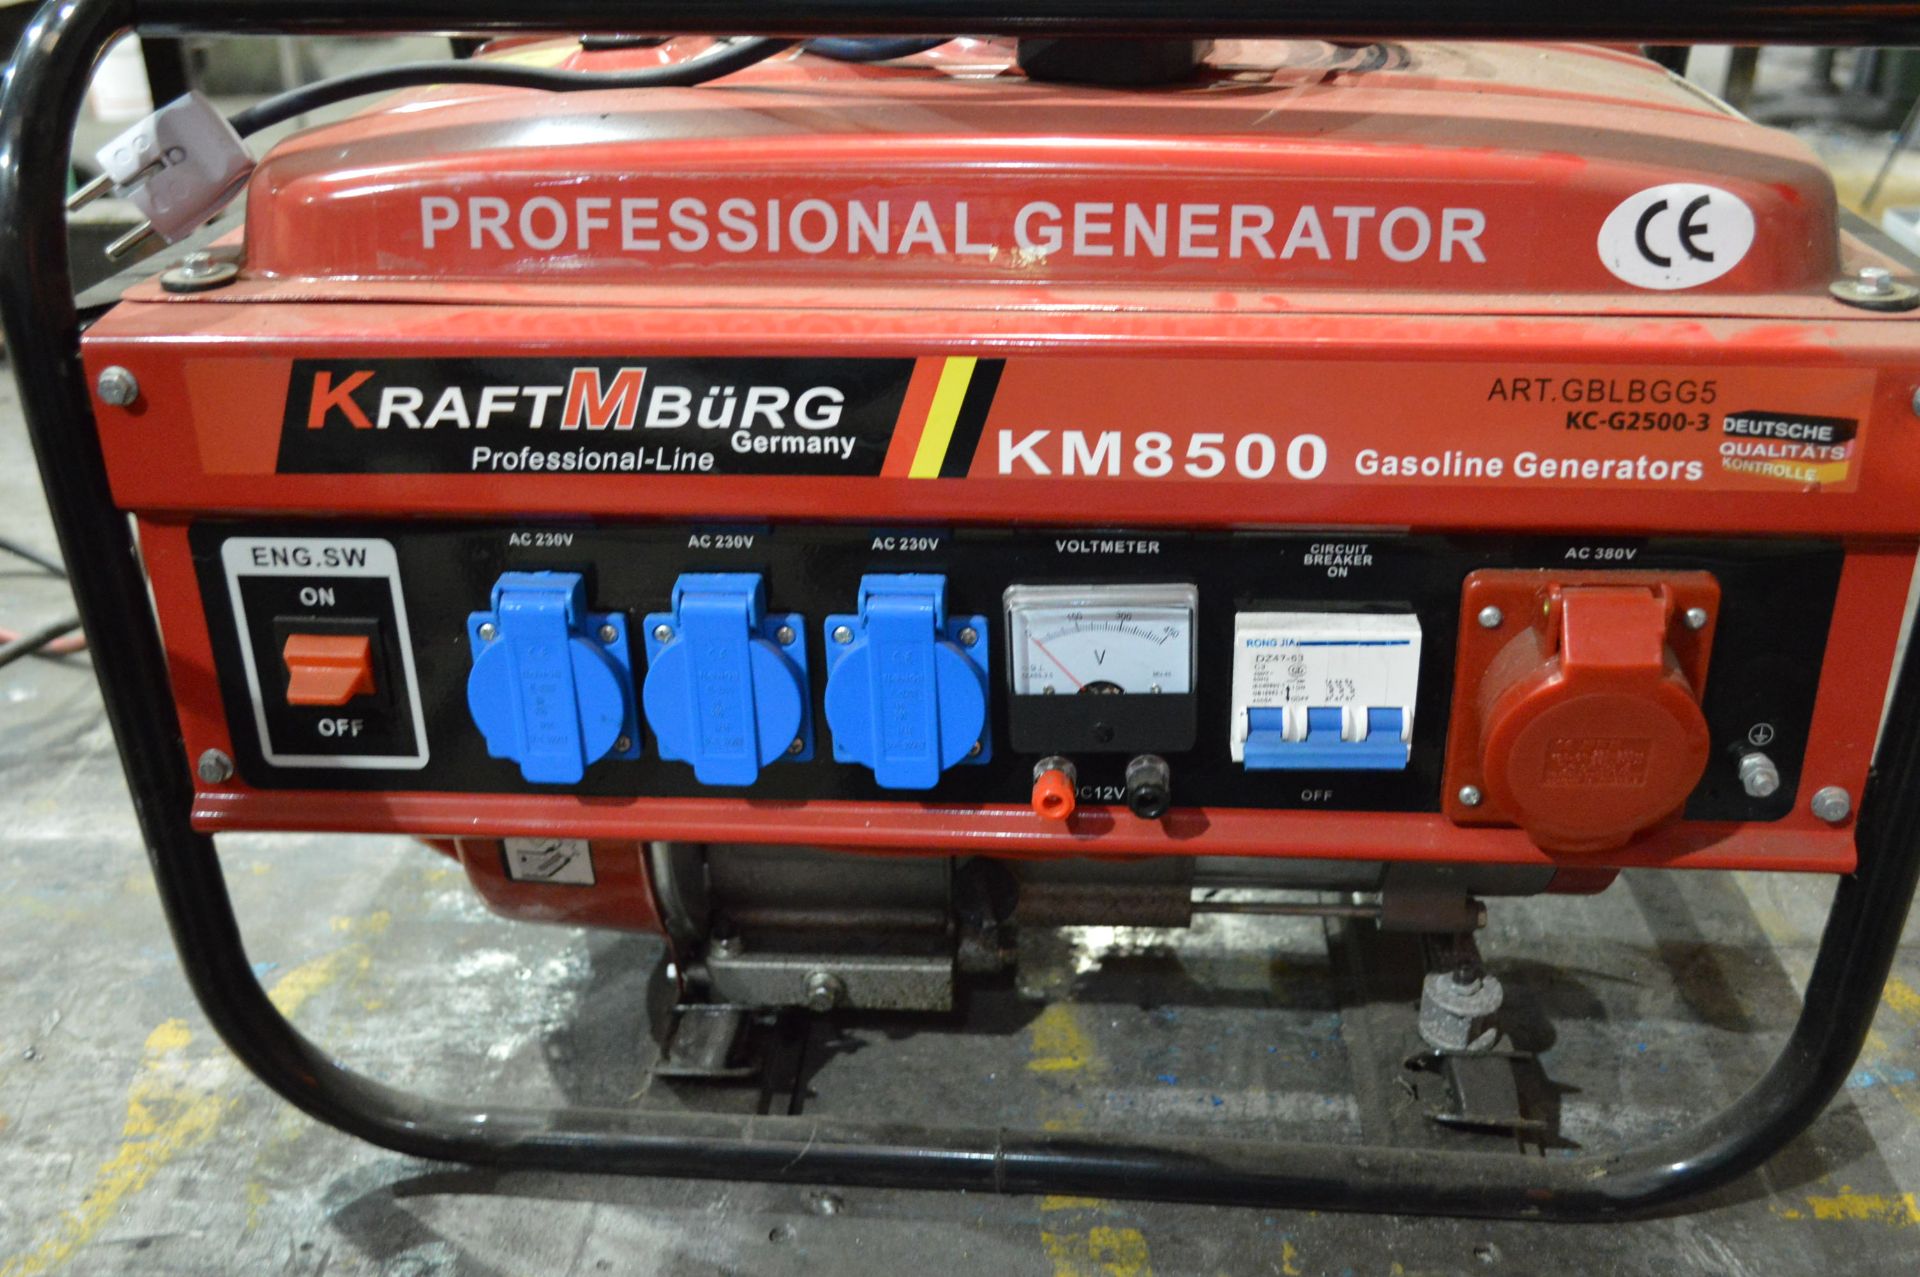 Kraftmburg KM8500 Petrol Generator, with 6.5hp engine, 3 x 230v and 1 x 180v outlet - Image 4 of 4